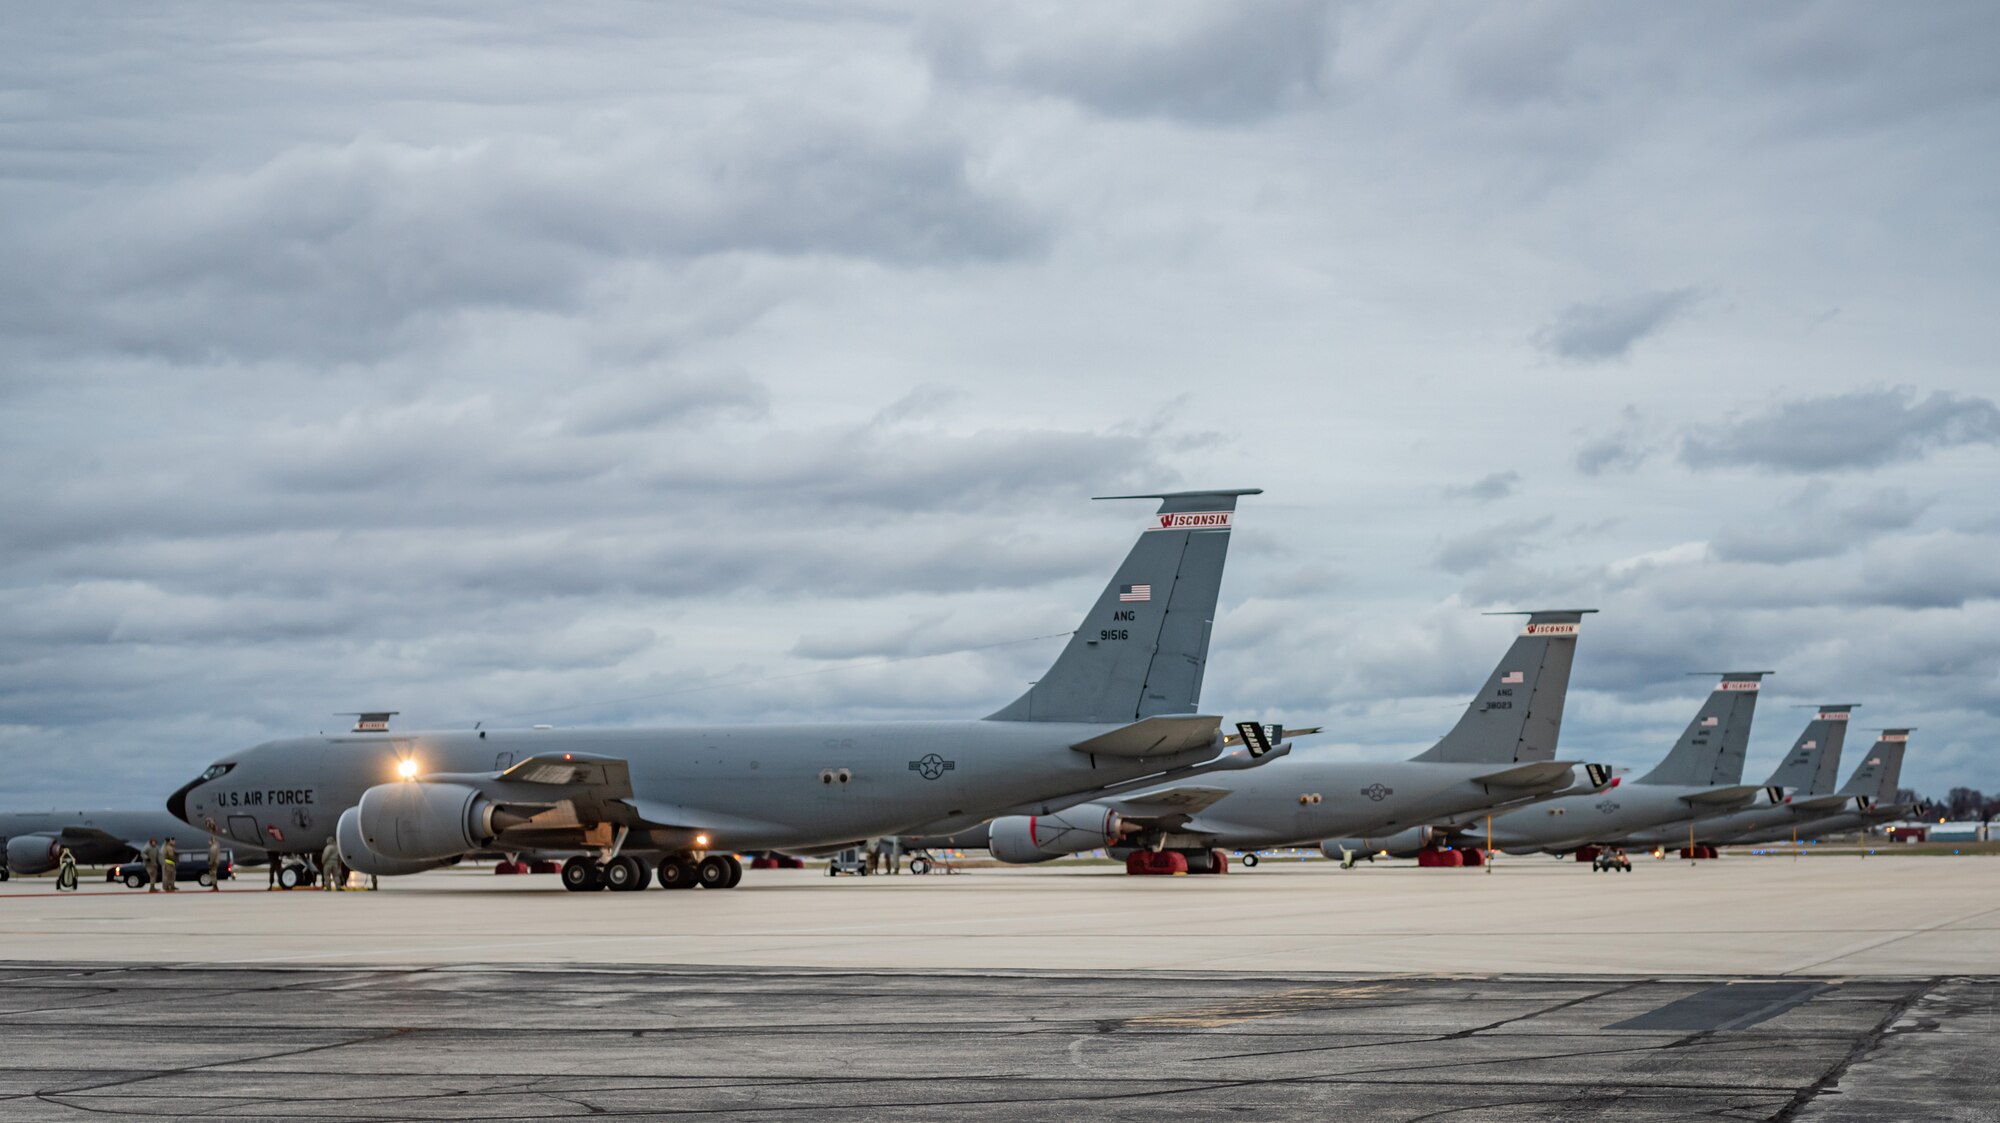 128th Air Refueling Wing KC-135's lined up on the ramp.